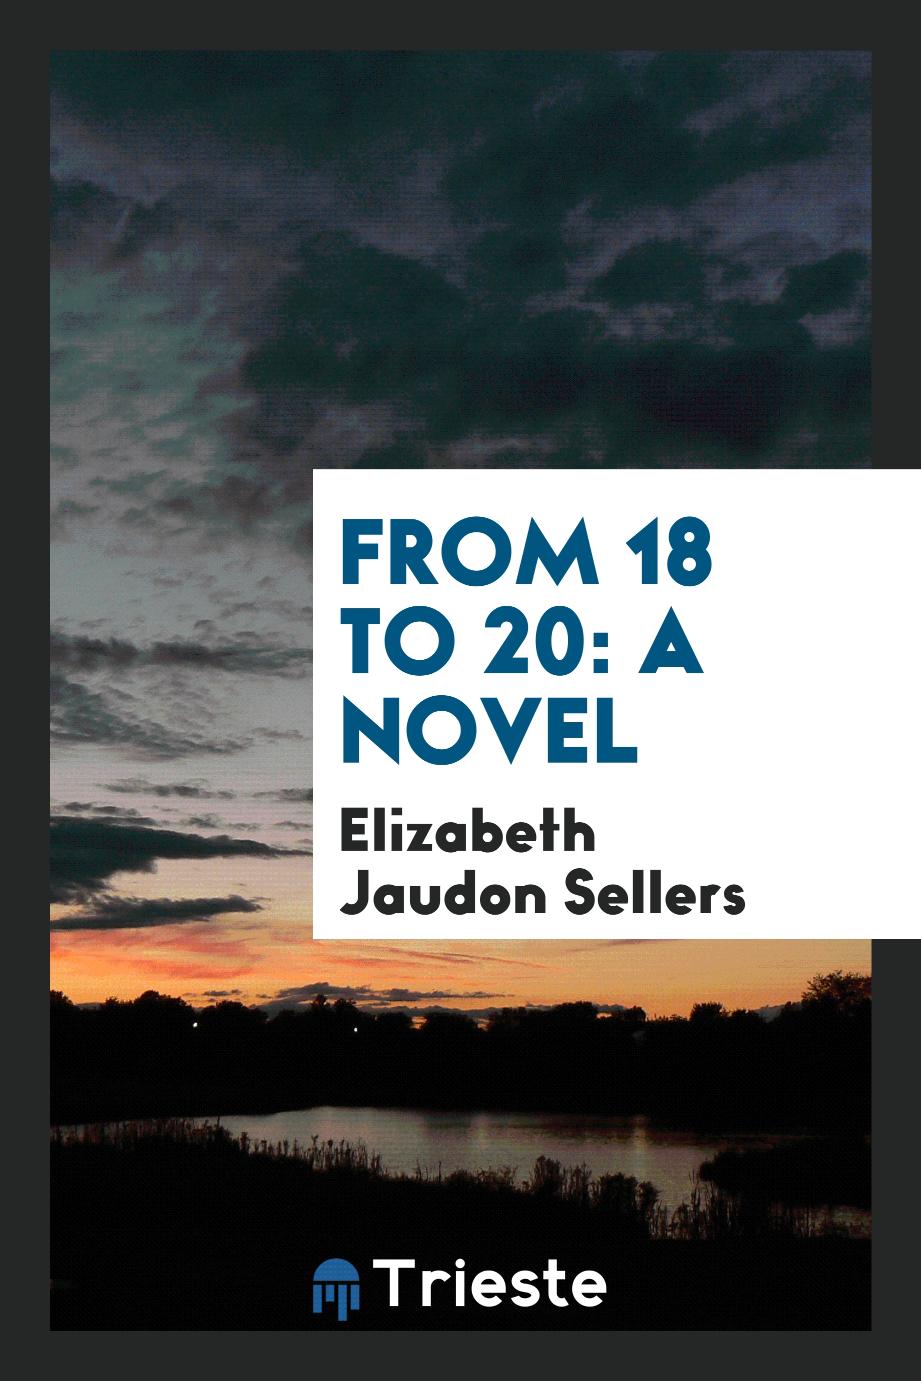 From 18 to 20: A Novel